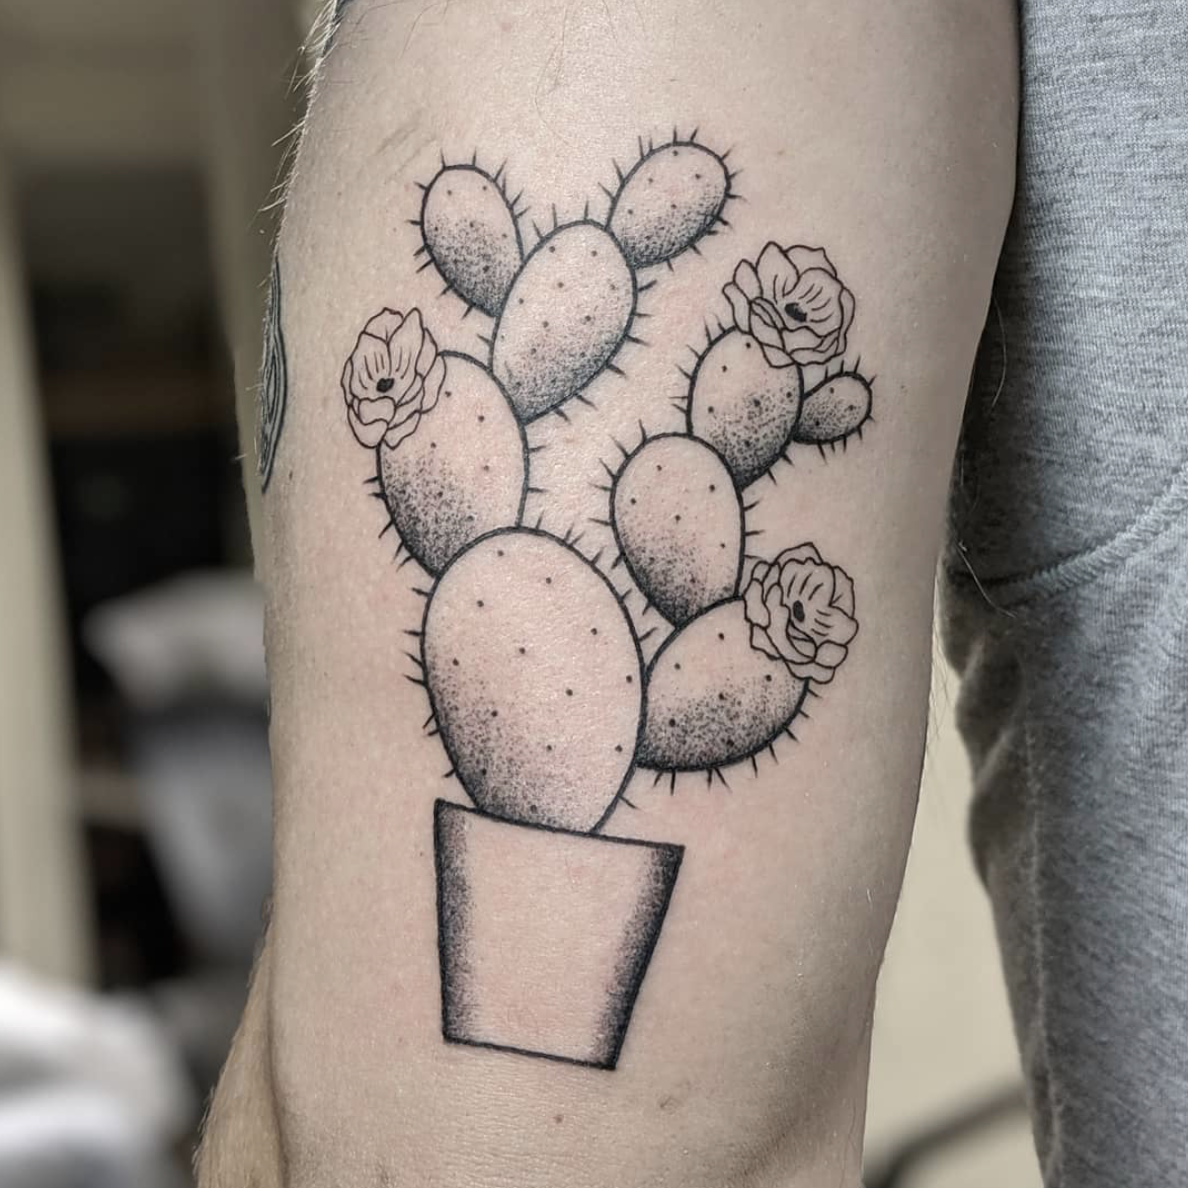 Cactus tattoo on the ankle